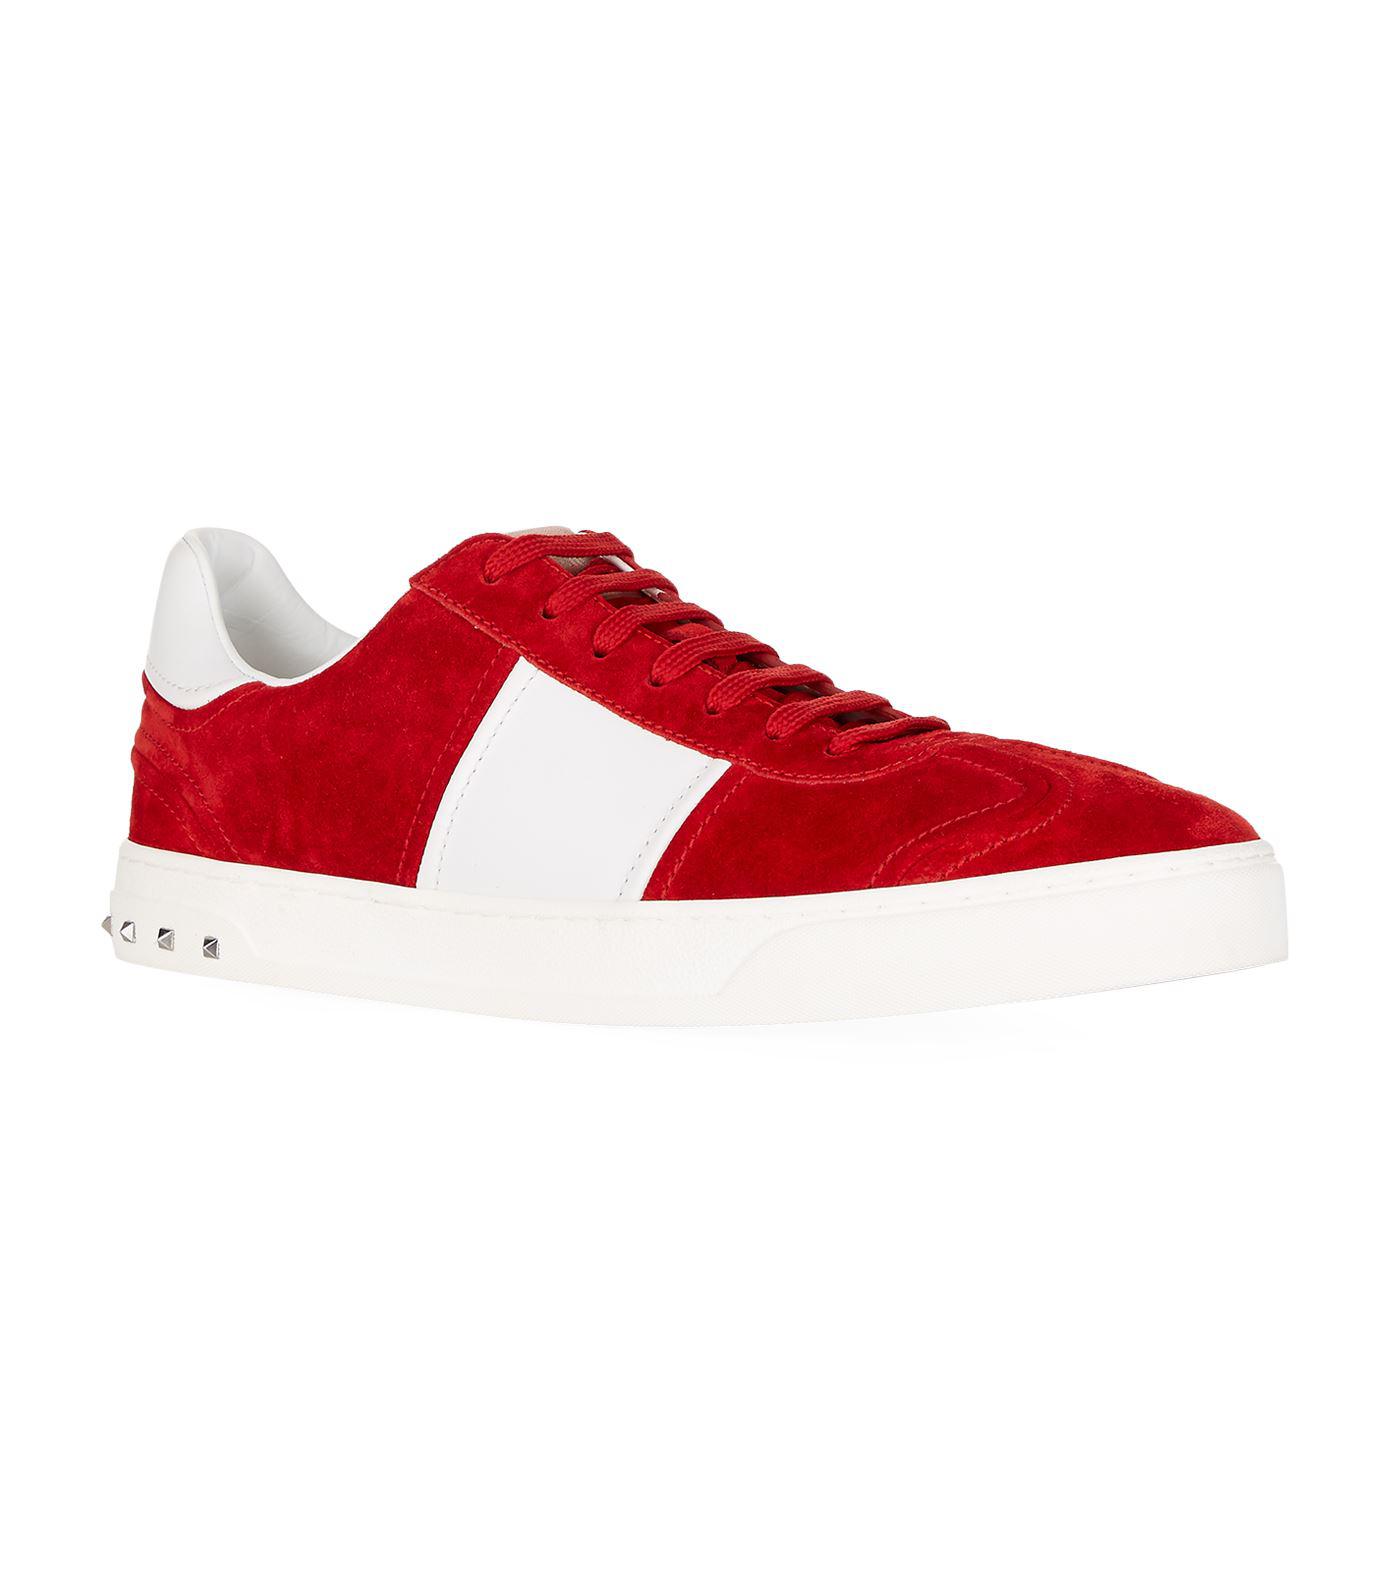 Lyst - Valentino Men's Suede Leather Sneaker Shoes White Red in Red for Men